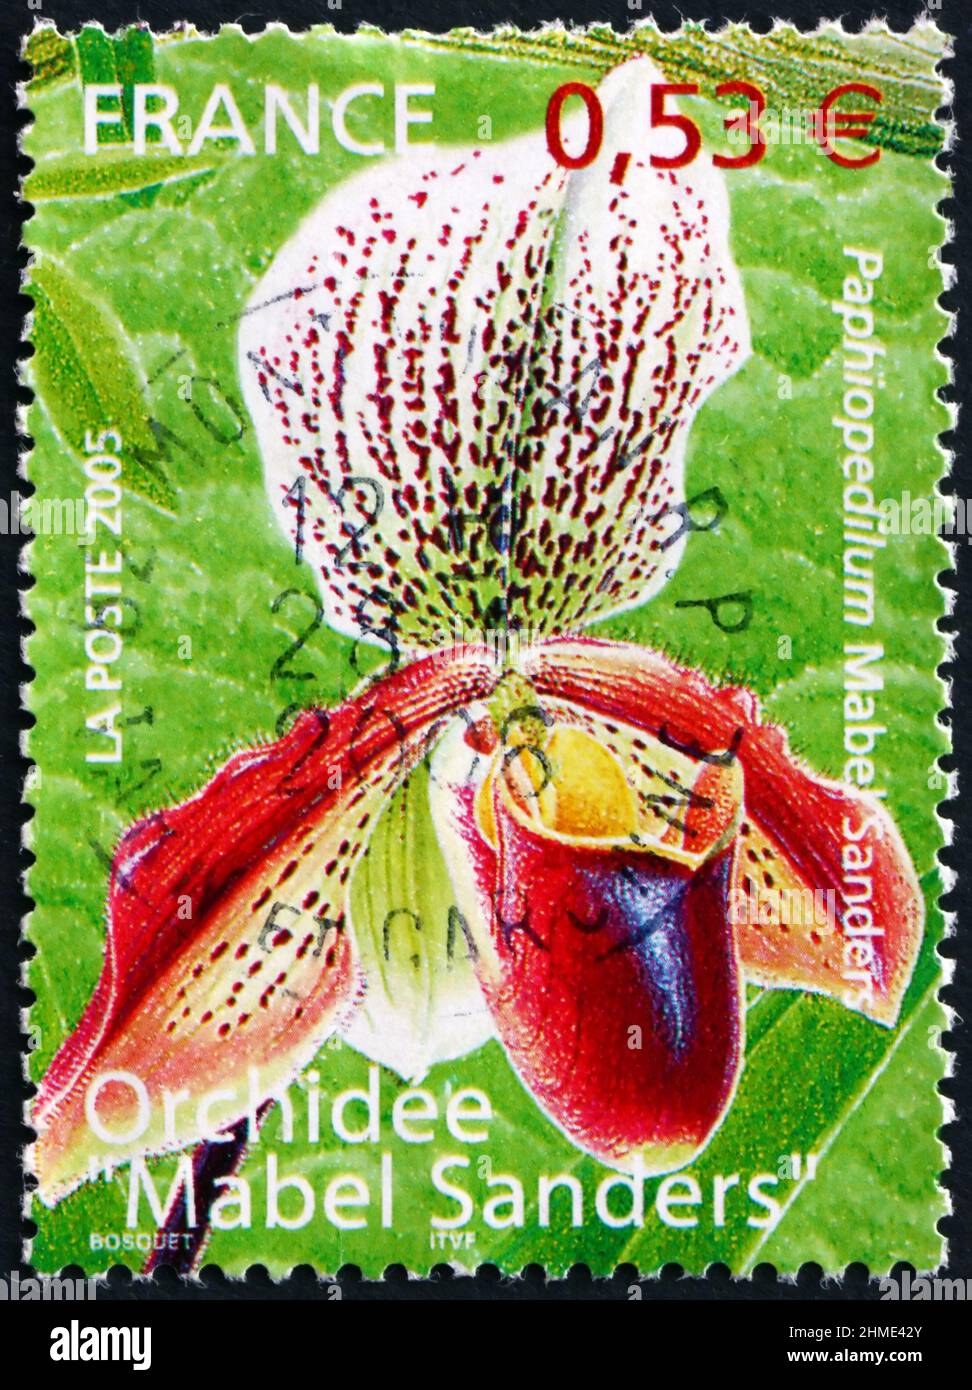 FRANCE - CIRCA 2005: a stamp printed in France shows Paphiopedilum Mabel Sanders, is an orchid hybrid originated by Opoix in 1919., circa 2005 Stock Photo